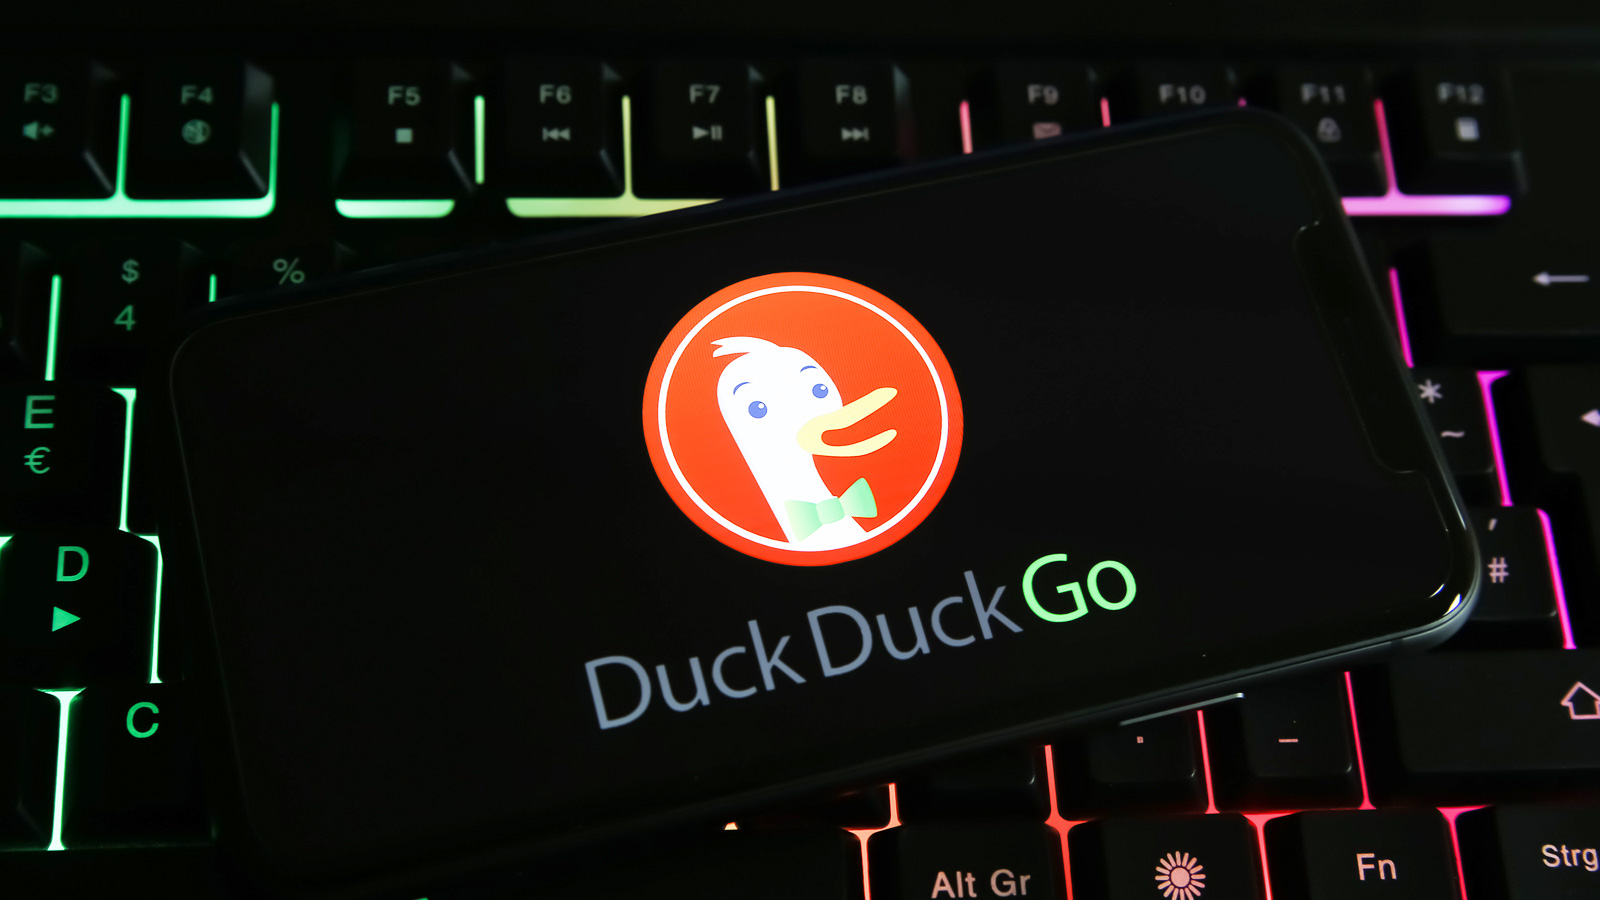 DuckDuckGo Has the Ability to Prevent Android Apps from Tracking your Activities